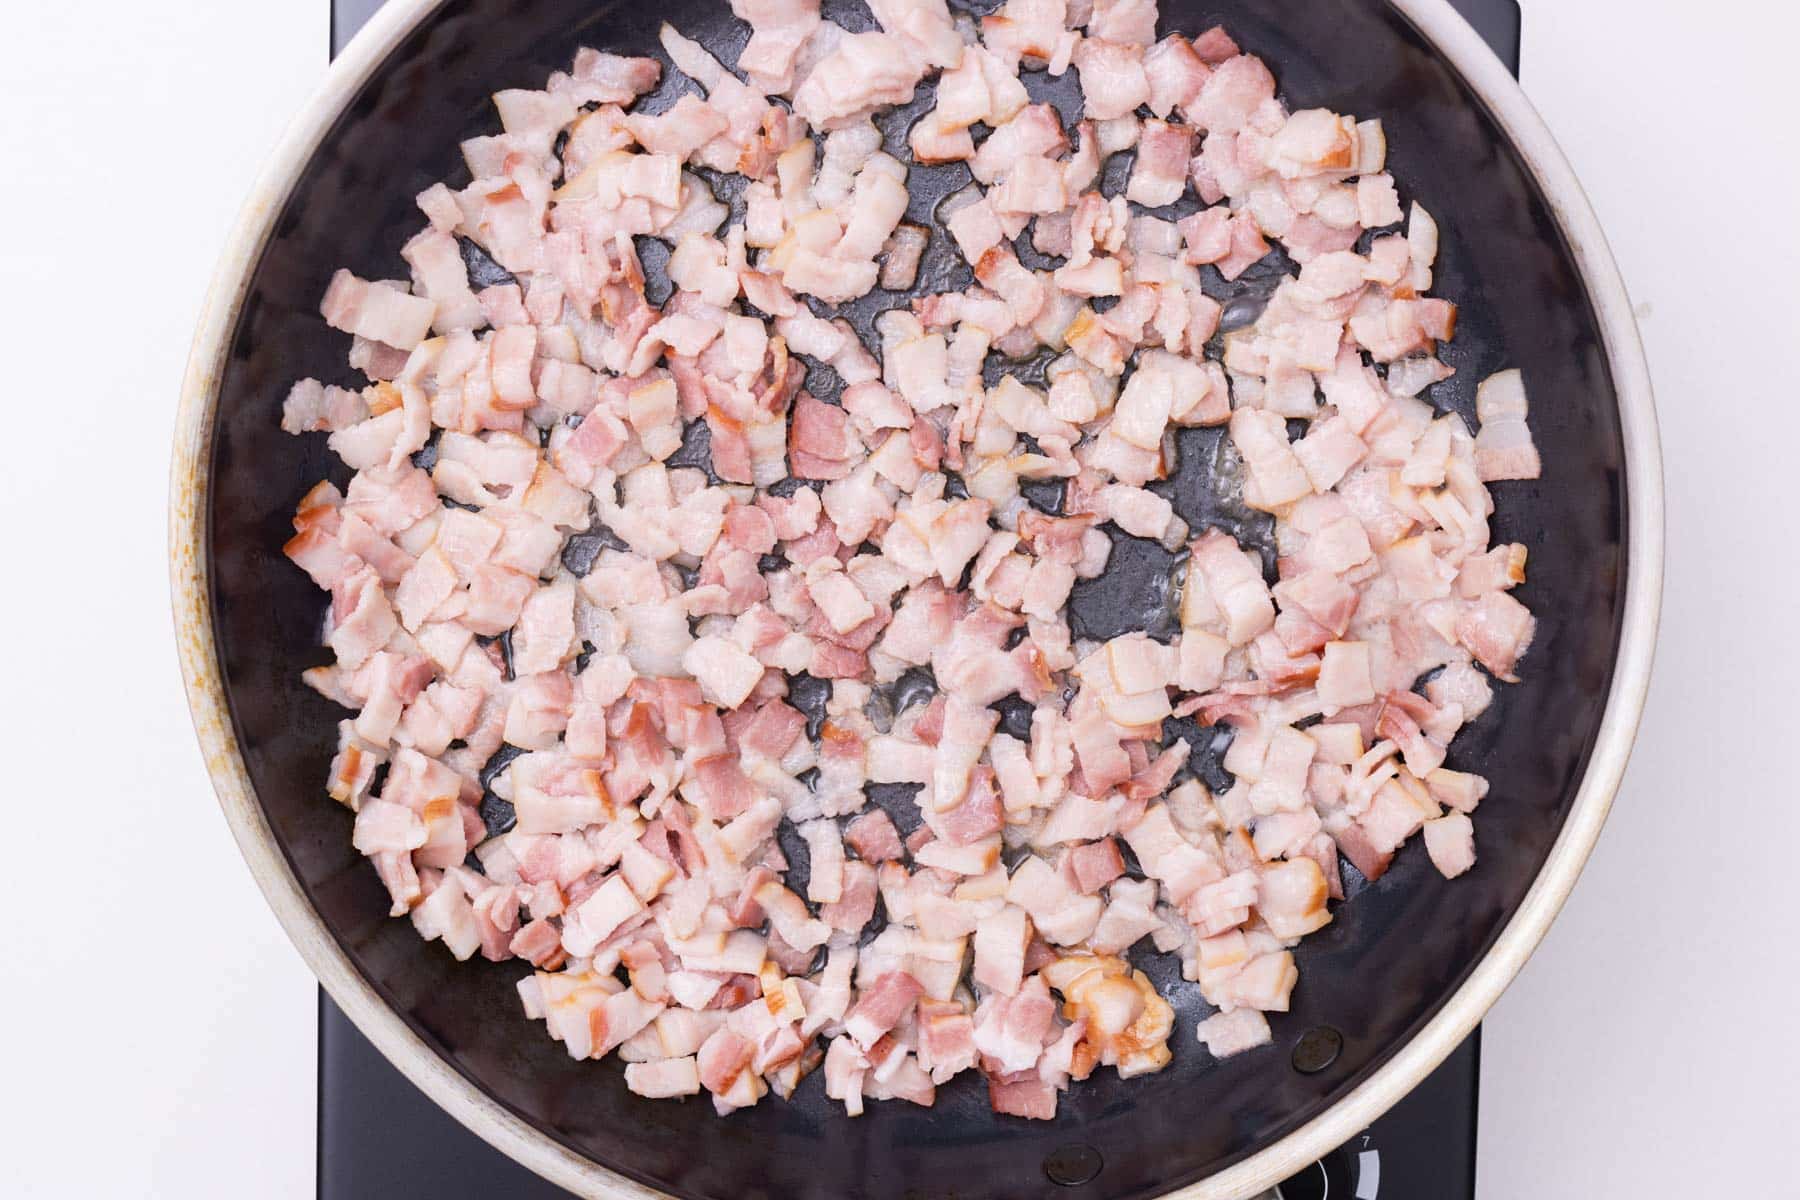 Bacon is cooked in a skillet.